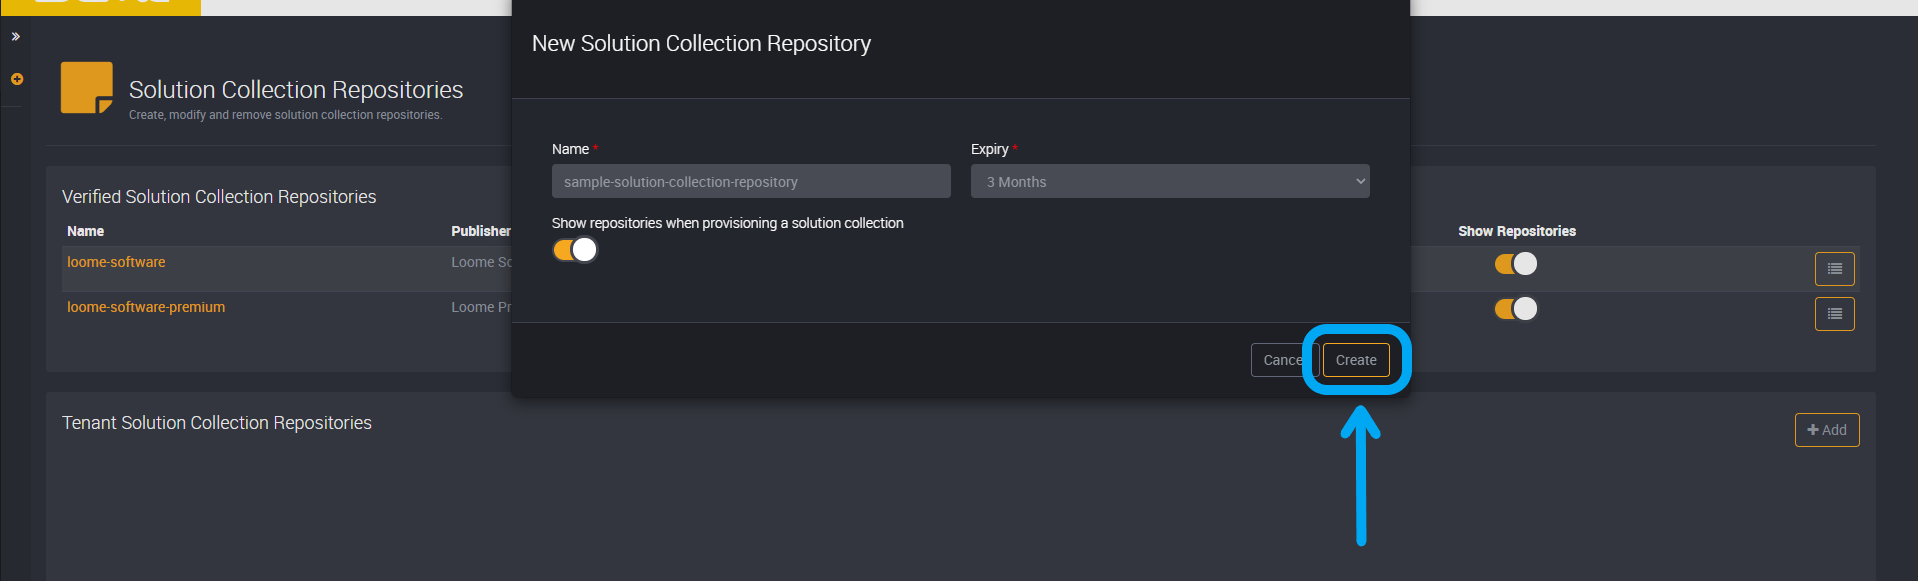 Add solution collection repository